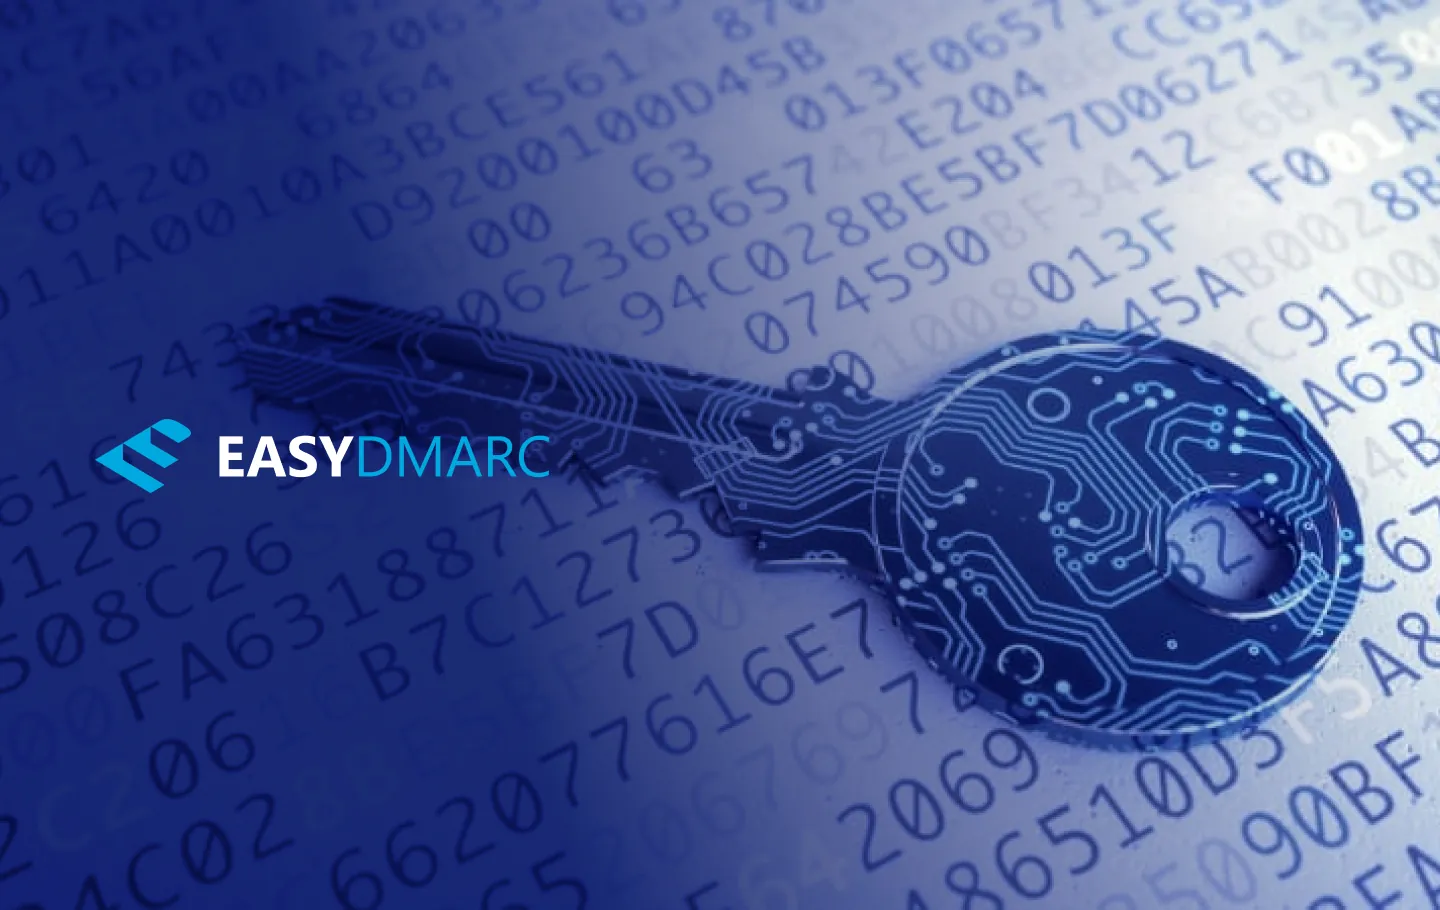 Image of a key with number and lettter combinations on it, EasyDMARC logo on the left side